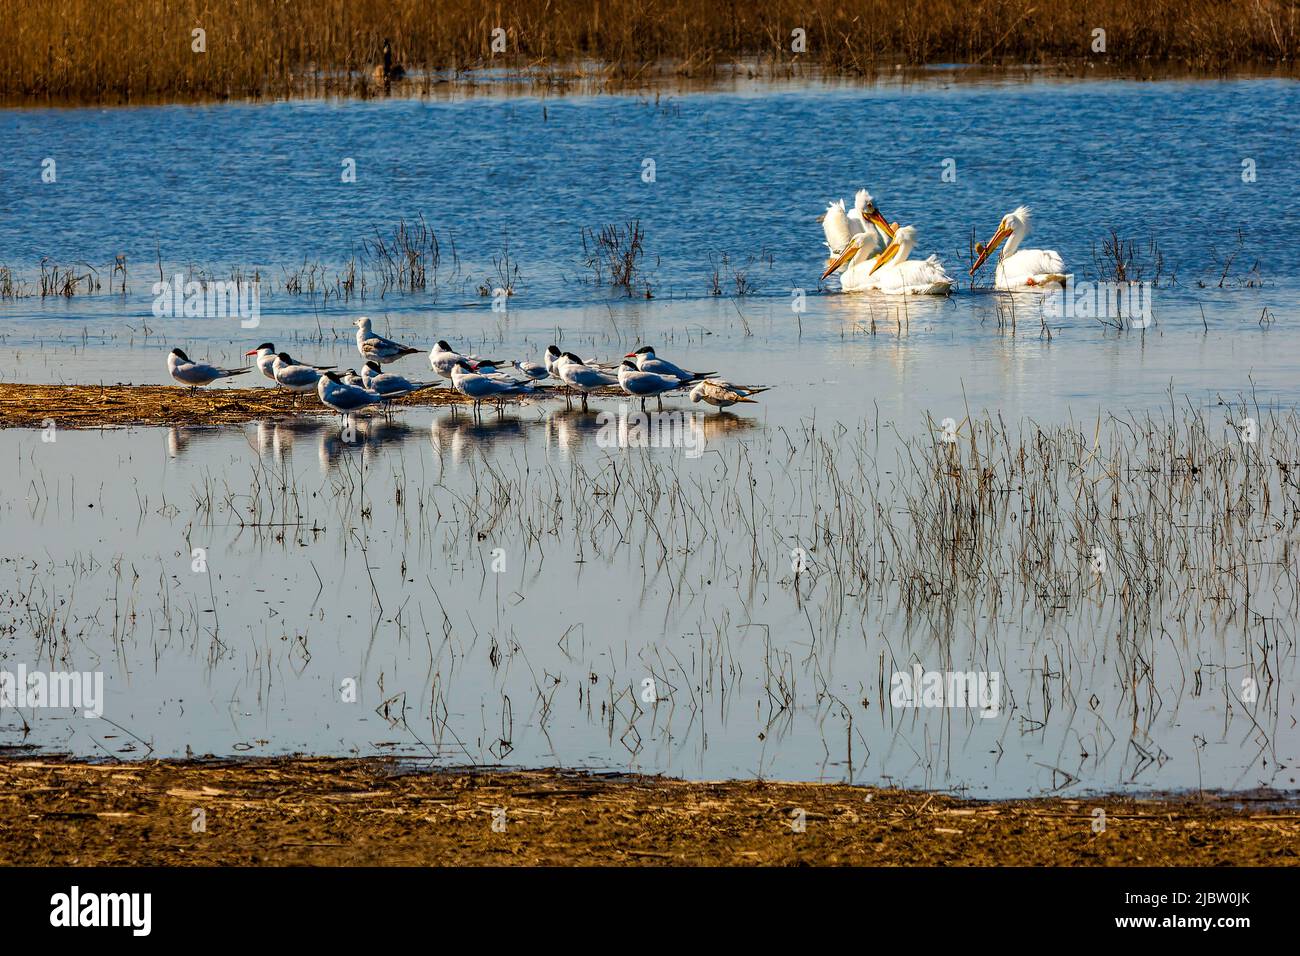 American White Pelicans and Common Terns share a wetland area at Pointe Mouillee State Game Area in Monroe County, Michigan. Stock Photo